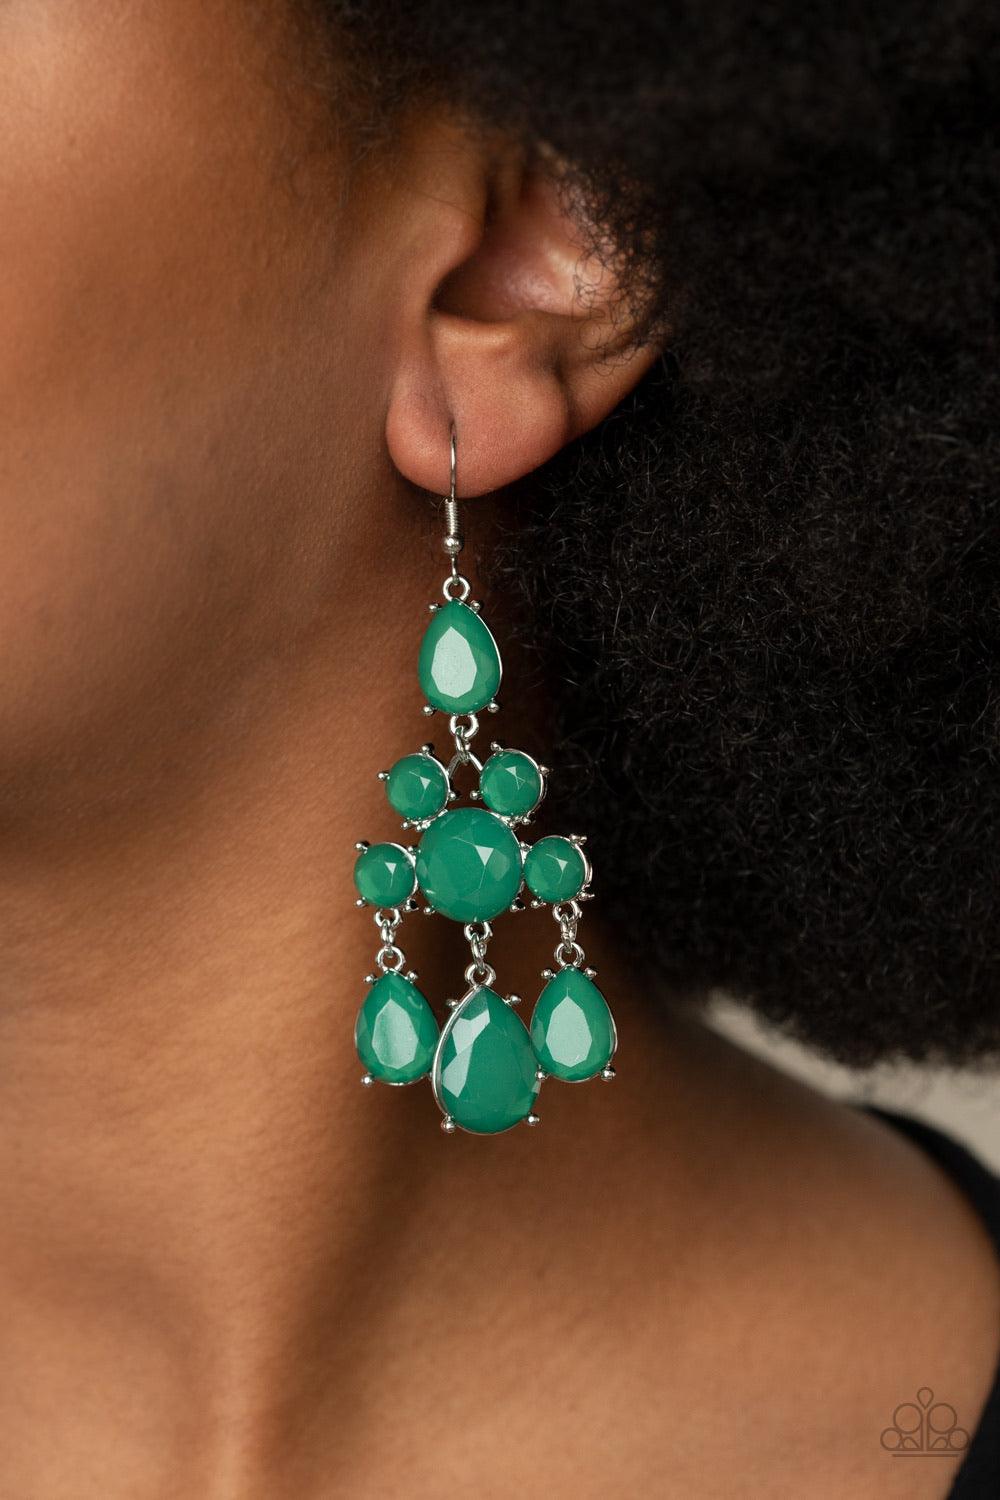 Paparazzi Accessories Afterglow Glamour - Green A dewy collection of glassy round and teardrop green gems delicately connect into an elegant chandelier. Earring attaches to a standard fishhook fitting. Sold as one pair of earrings. Jewelry